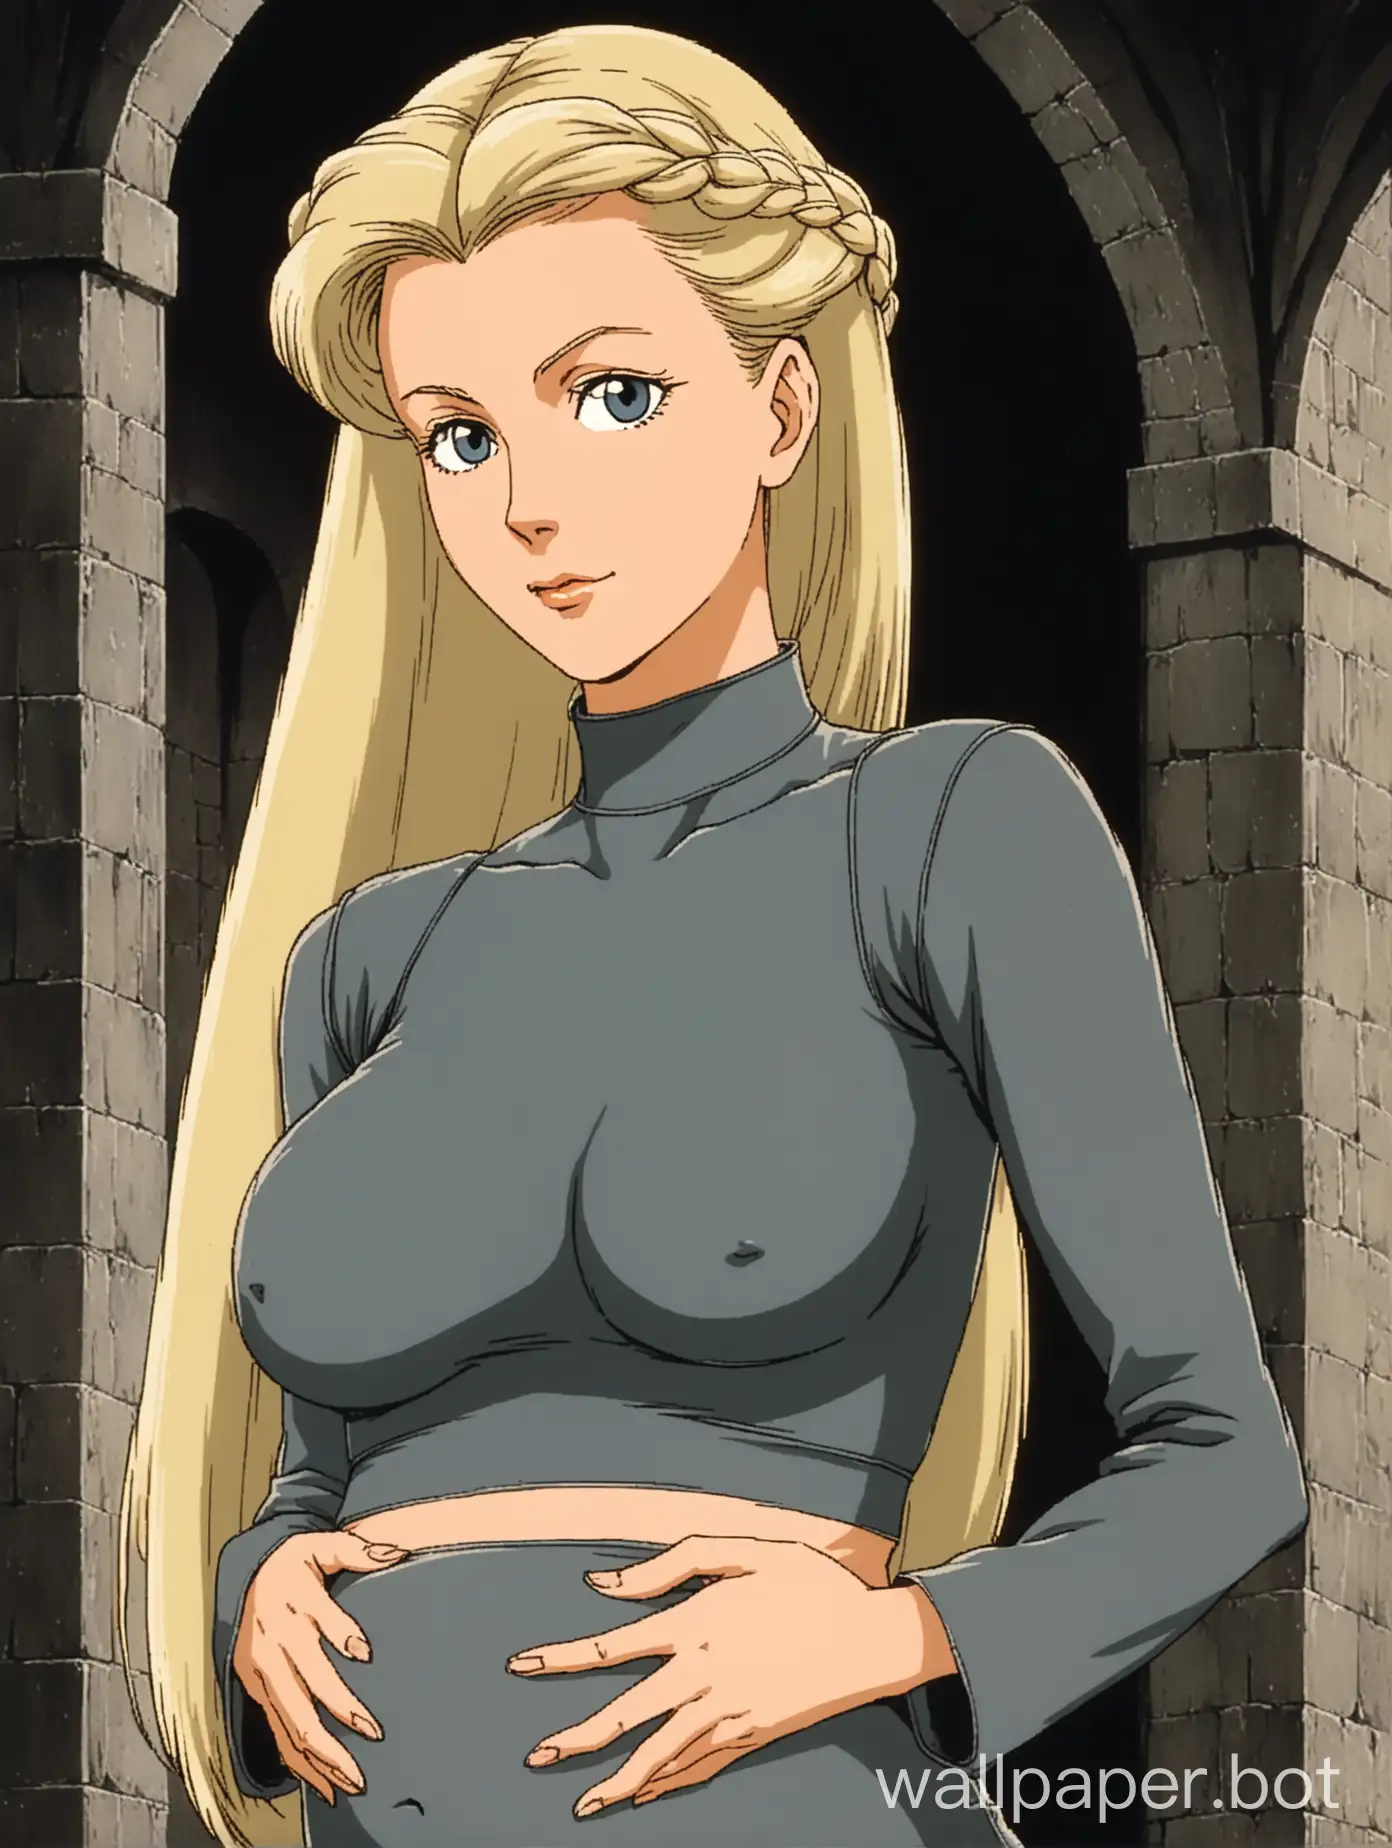 1980s retro anime, portrait of a young and attractive white woman, she is pregnant, she has long wavy white-blonde hair pulled back into a braid, standing regally, elegant and slender, thin sharp face, dignified expression, wearing a very low-waisted long dark grey skirt, exposed belly, midriff, wearing a sheer skintight long-sleeve dark grey crop top, decorative stitching, medieval elegance, 1980s retro anime, medieval castle interior